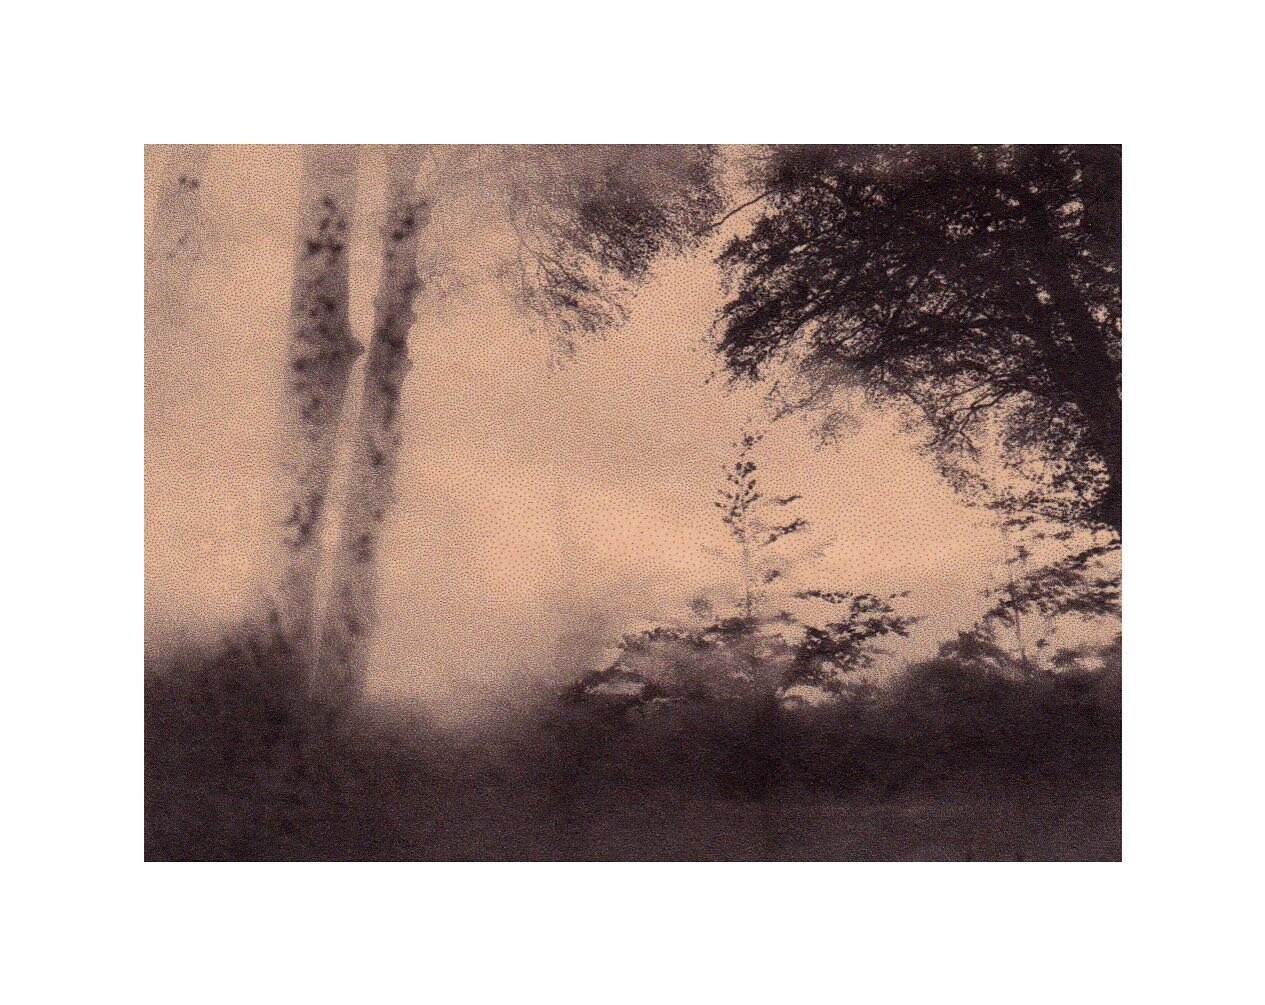 &ldquo;Lamenting the Earth&rdquo; 
Toned rice paper prints
.
.
.
.
.
.
#alternativeprocesses #antiquated #antiquatedphotography #landscape #landscapephotography #landscapeart #melancholy #earth #poetry #fog #forest #shadows #trees #prints #landscapel